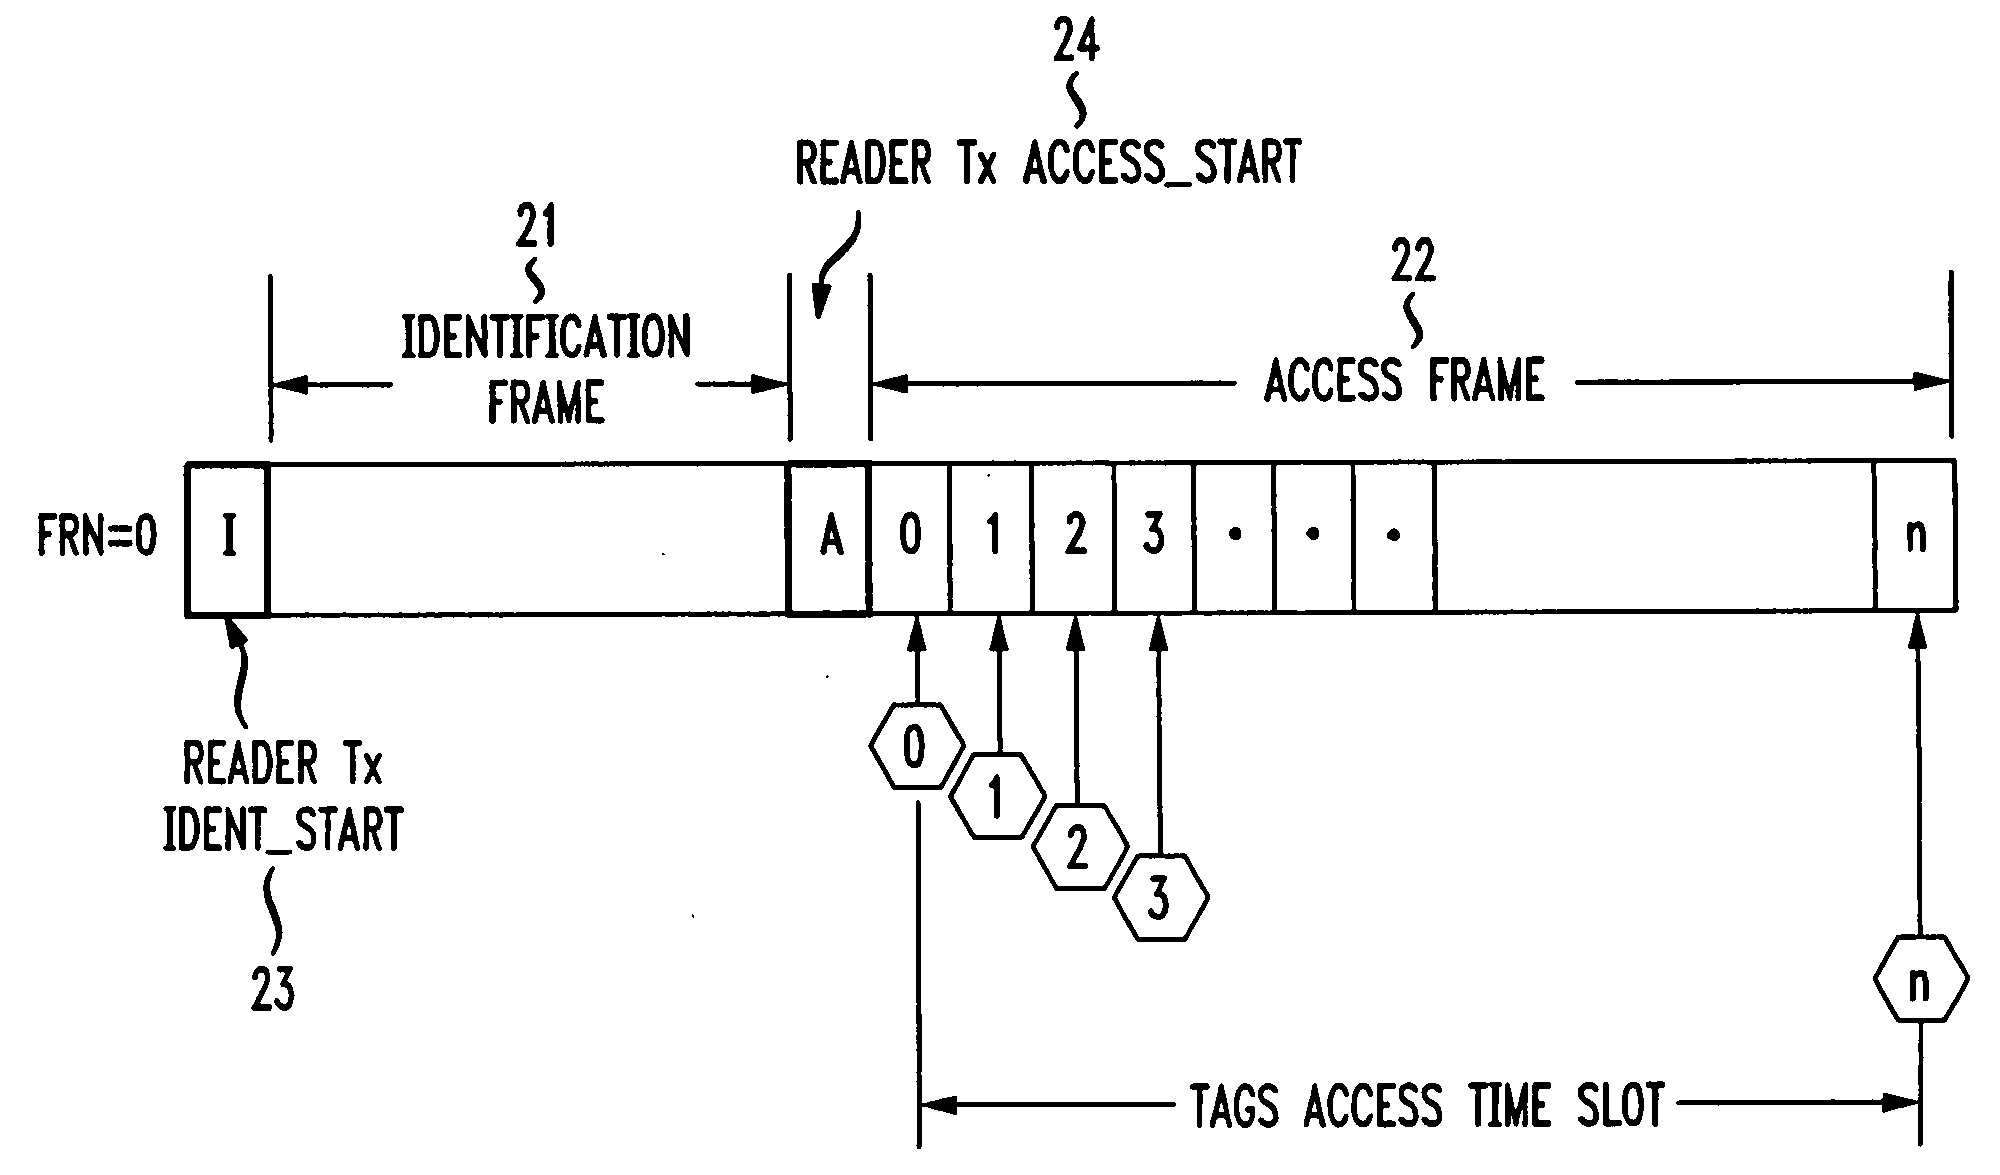 Collision resolution protocol for mobile RFID tag identifiaction